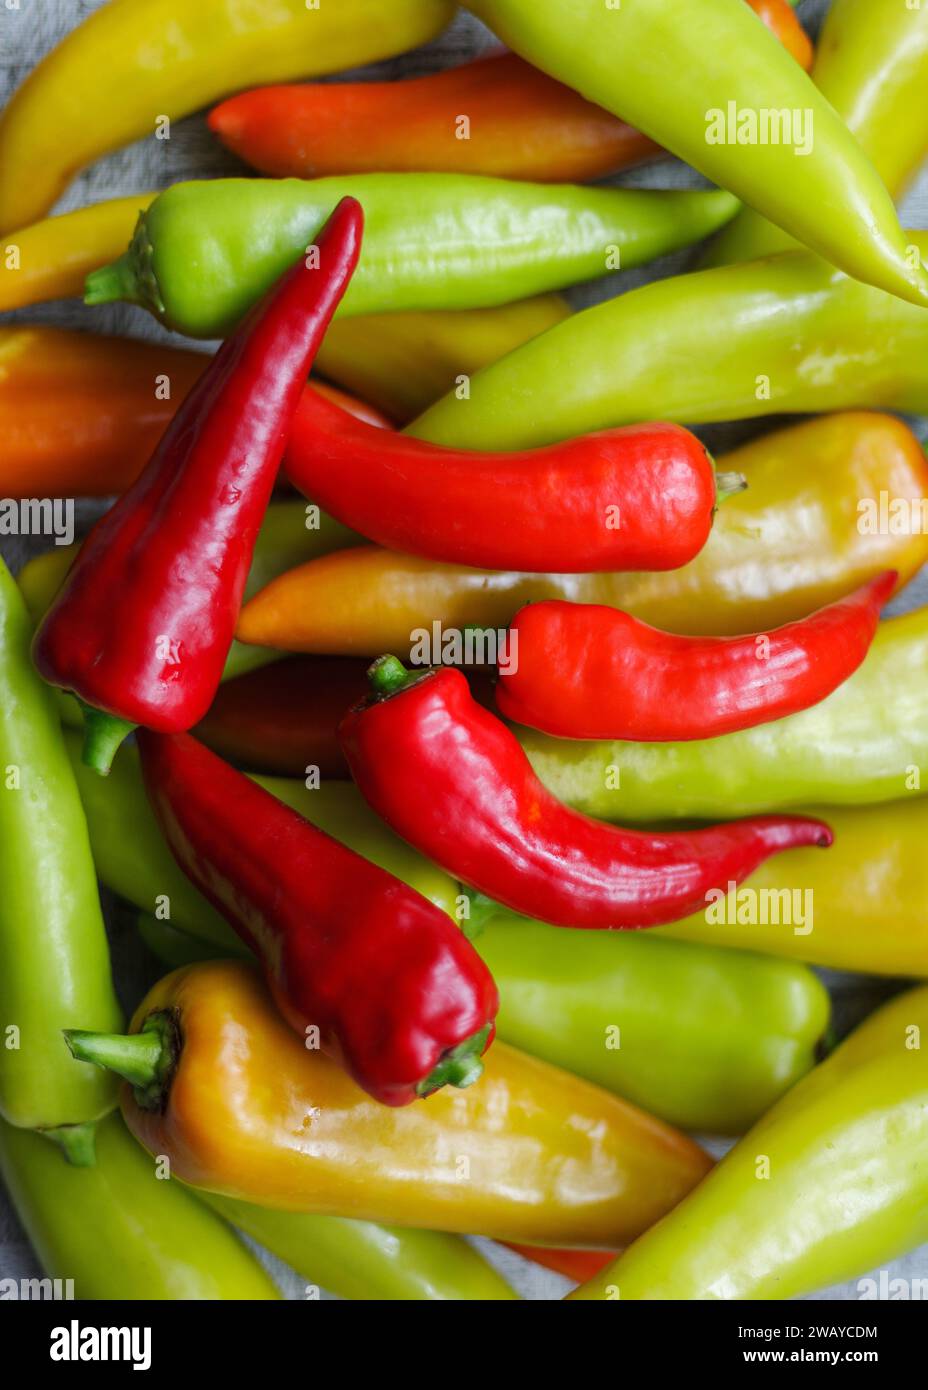 Red, yellow and green Bell Peppers. Vertical photo. Stock Photo